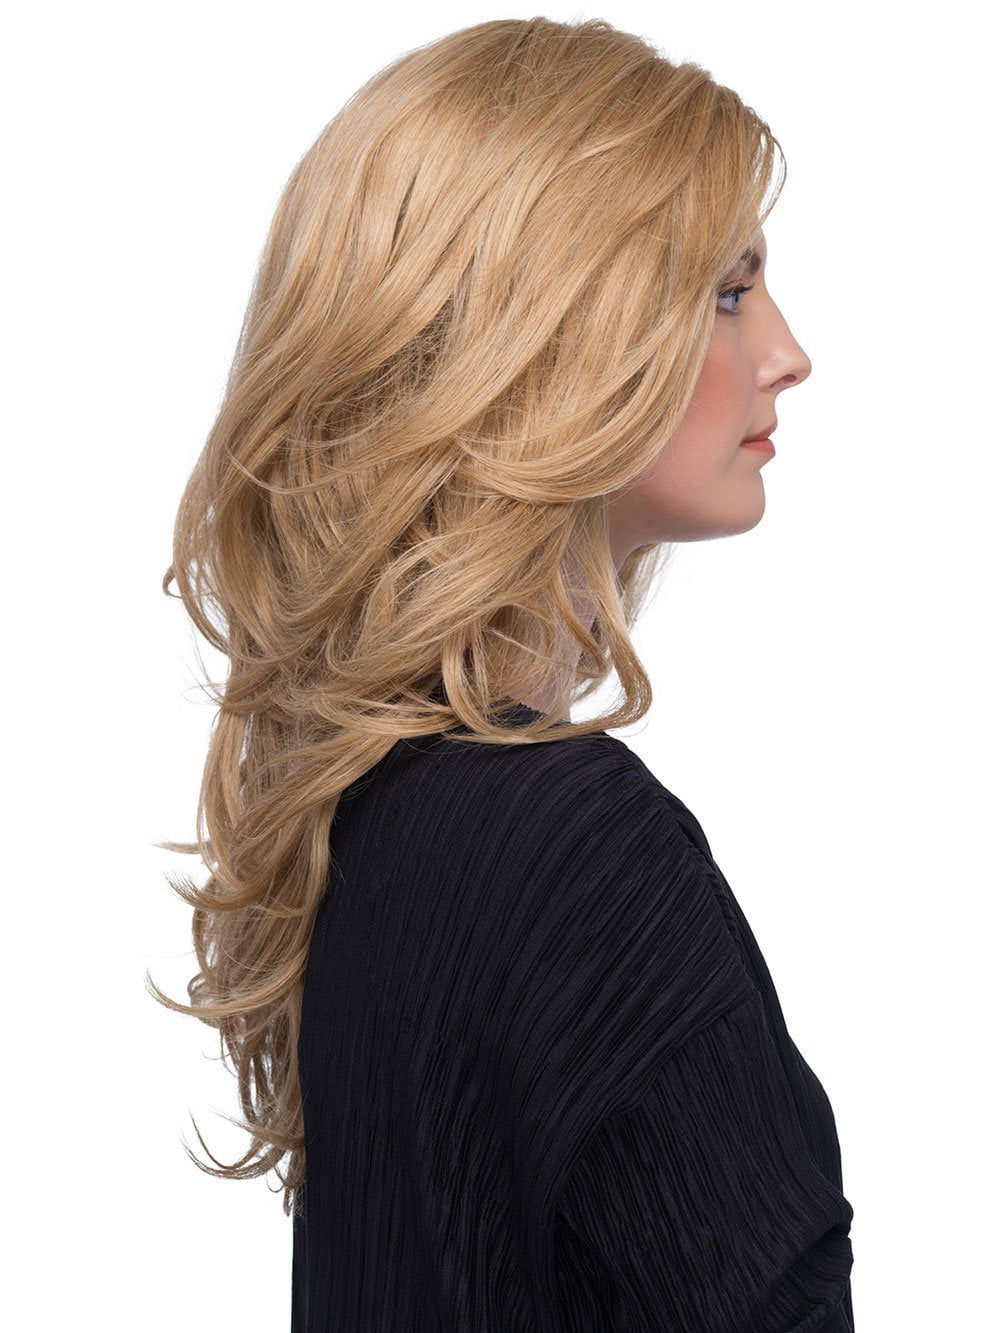 This below the shoulder style with long layers and loose waves is gorgeous. You can enjoy the freedom to style in any direction